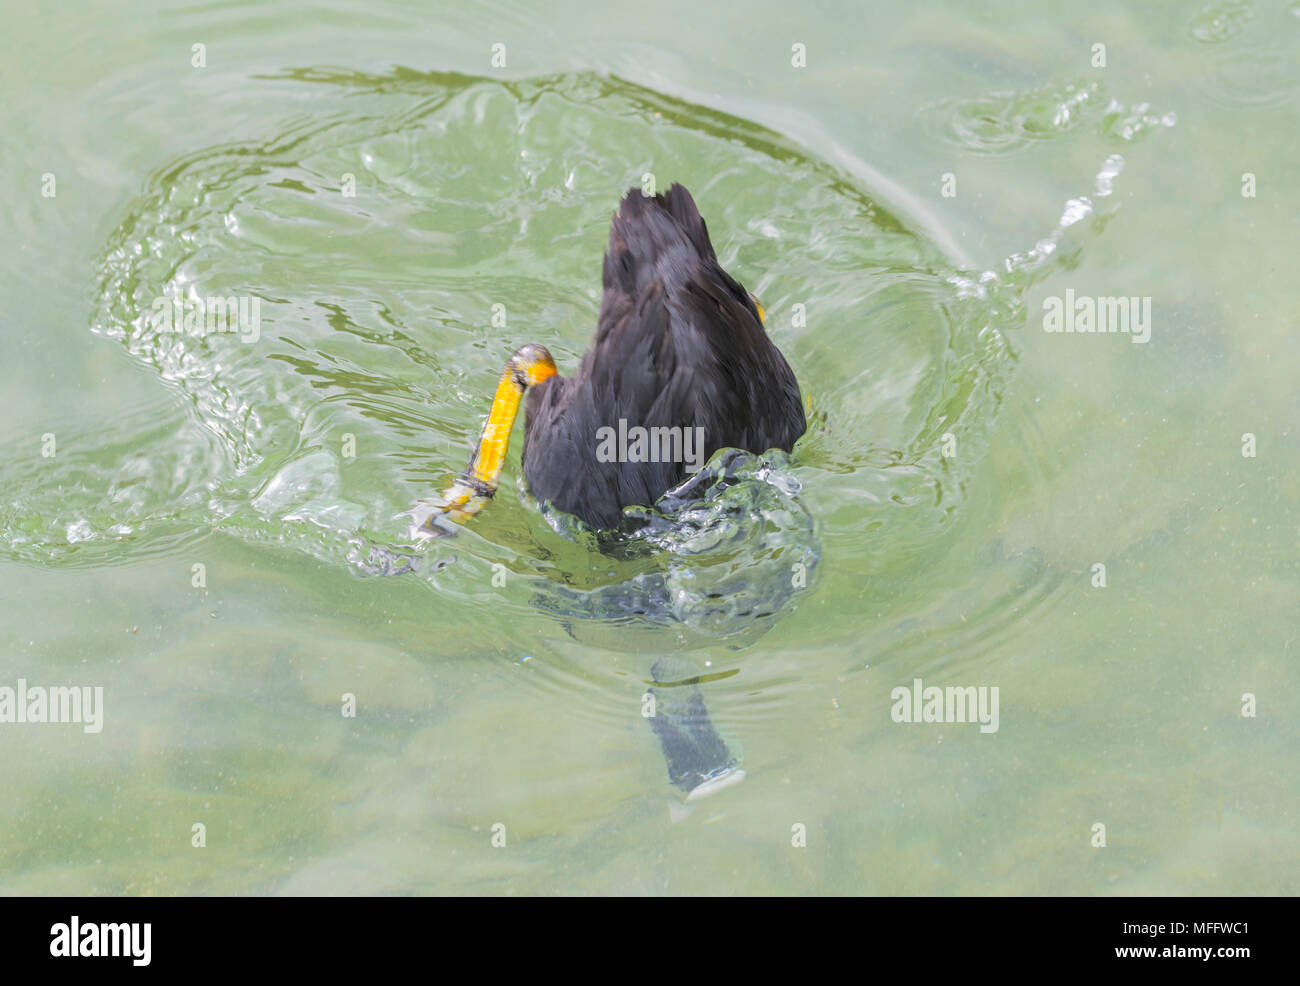 Eurasian Coot (Fulica atra), a water bird, diving under water in West Sussex, England, UK. Stock Photo